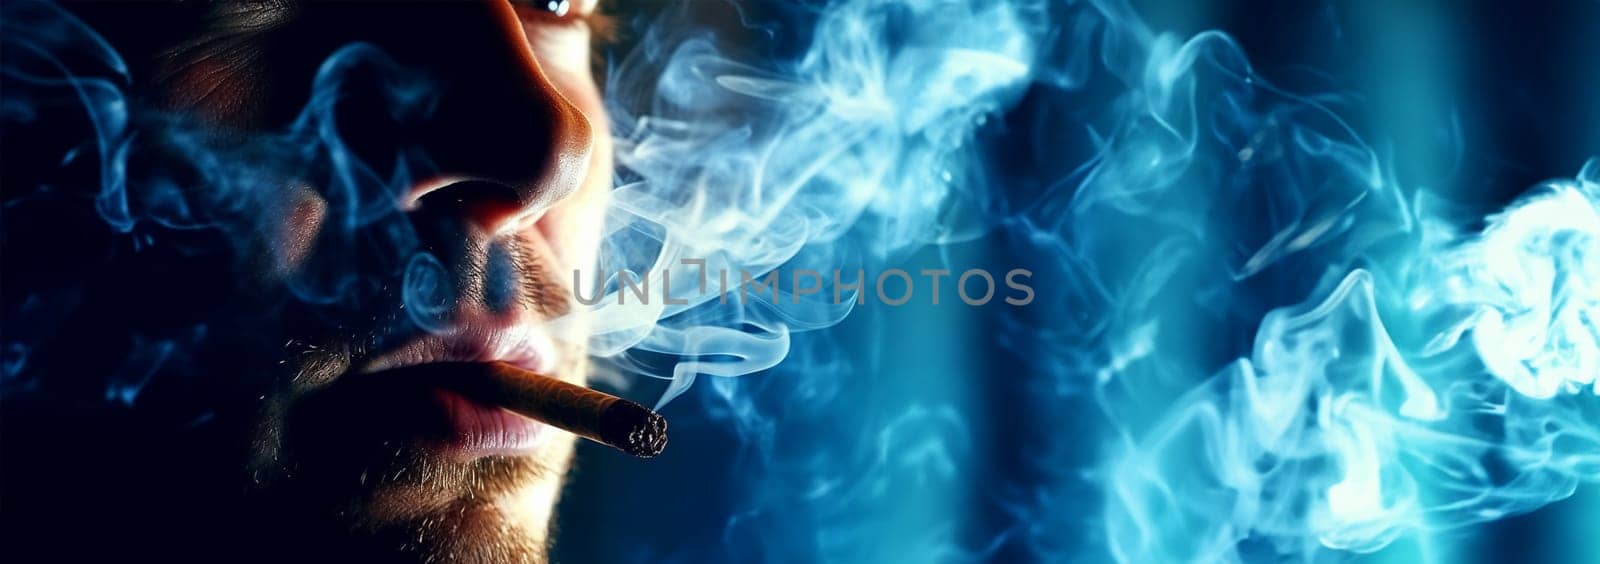 Stop smoking cigarettes concept. Portrait cigarette in mouth. Background surrounded with smoke. quitting smoking cigarettes. Quit bad habit, health care concept. No smoking. Copy space by Annebel146